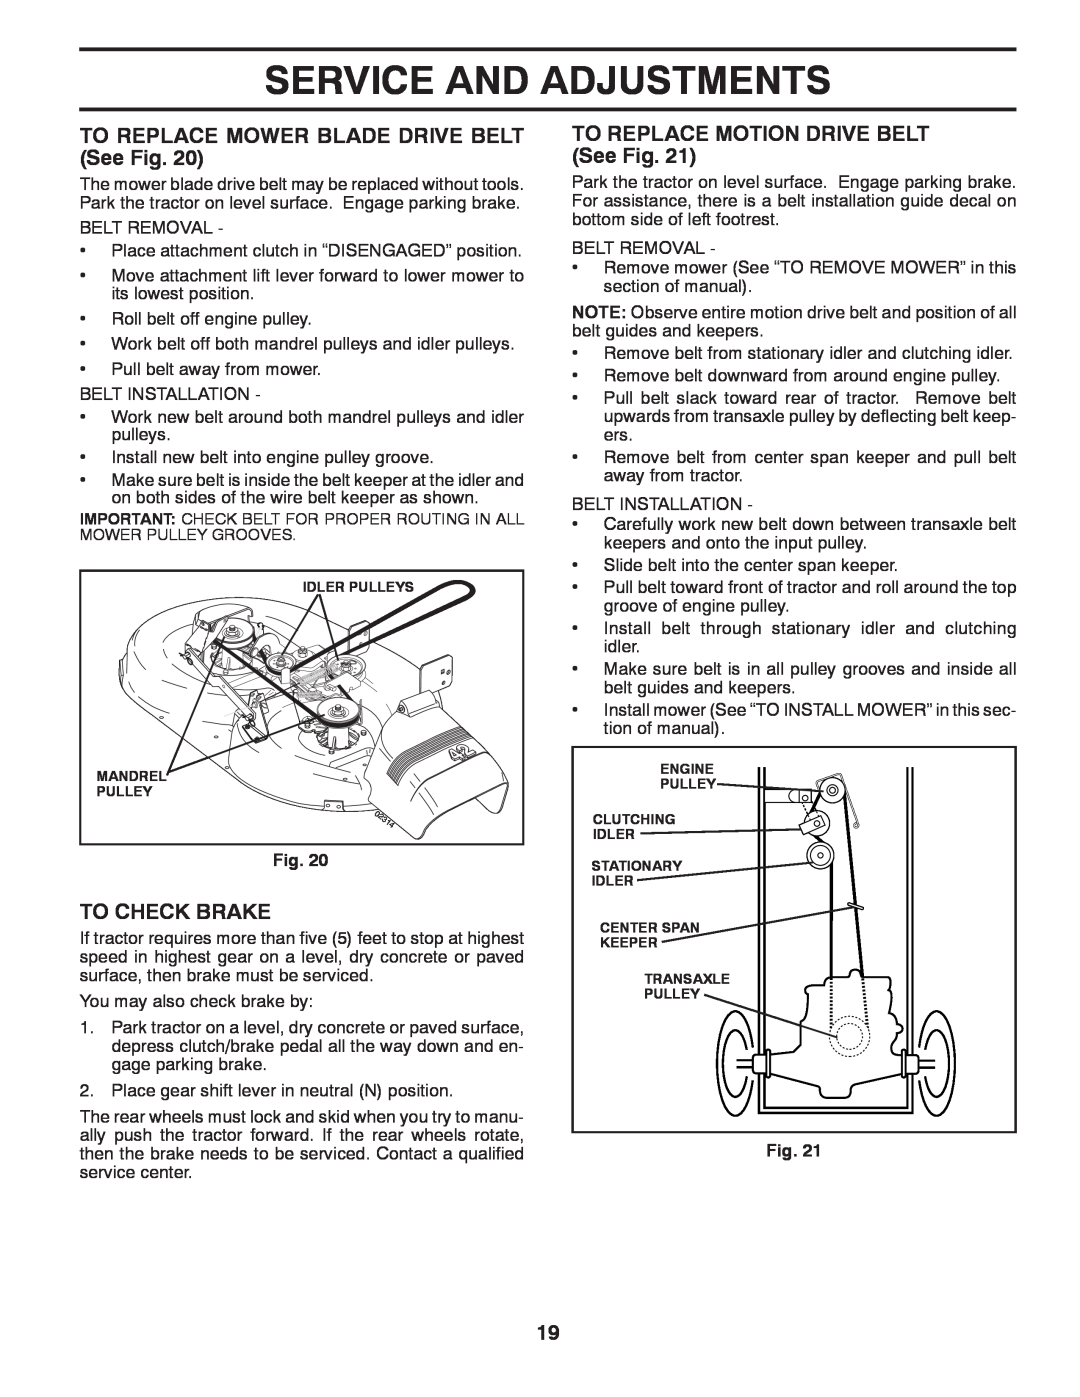 Poulan 96016002400, 532 43 88-17 manual Service And Adjustments, TO REPLACE MOWER BLADE DRIVE BELT See Fig, To Check Brake 